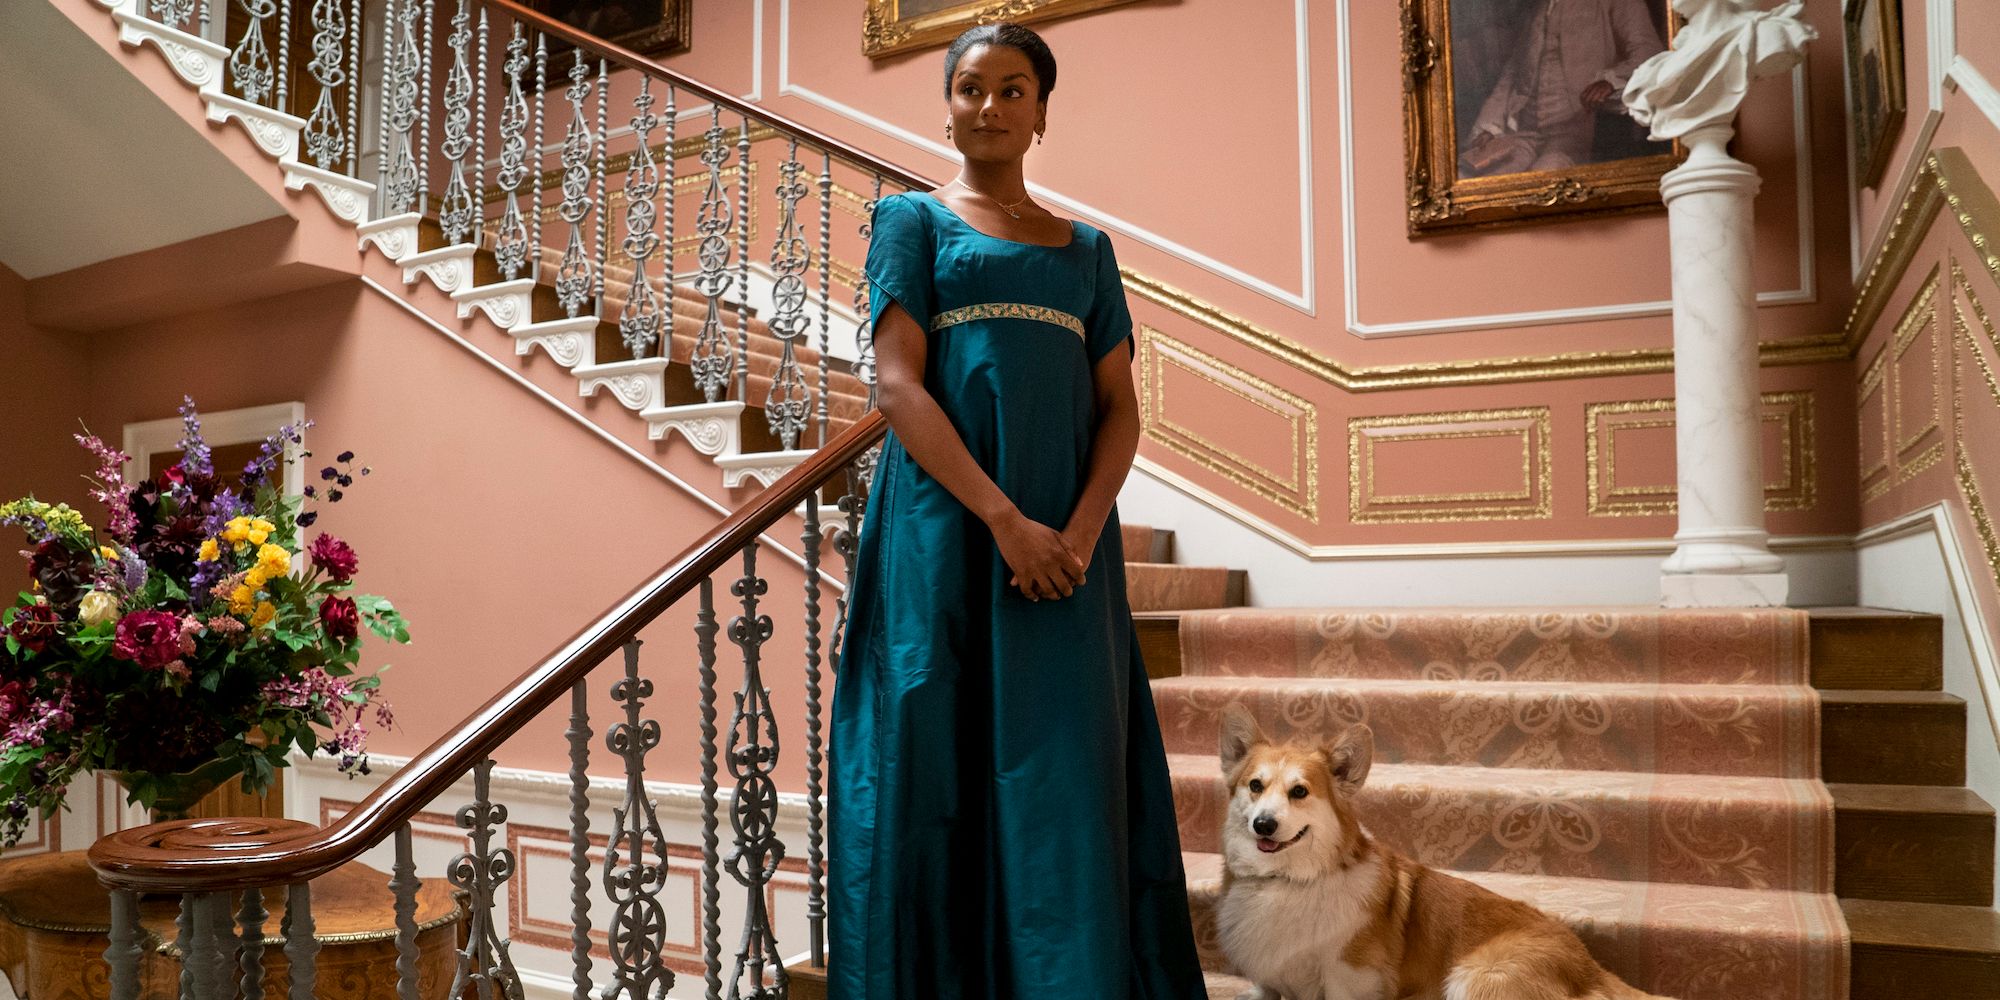 Kate Sharma stands on the stairs with her dog in Bridgerton Season 2